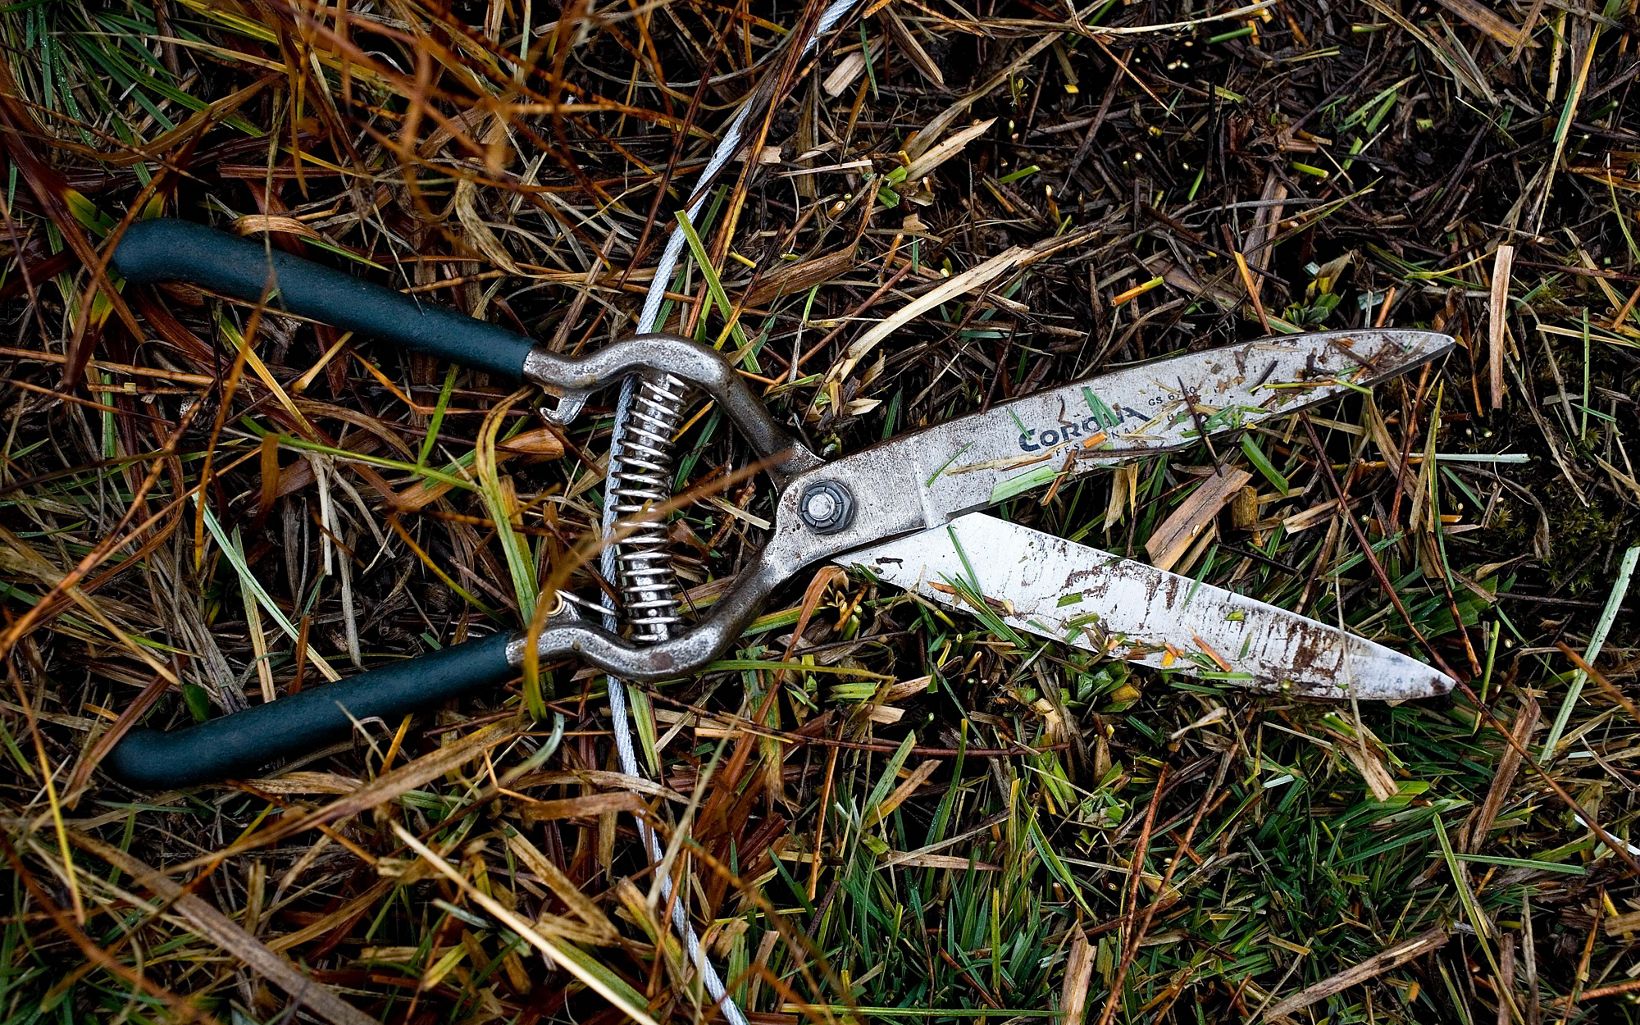 Close view of the scissors and hoop used for a residual dry matter measurement study, conducted by senior ecologist, Rich Reiner, and shown here in grasslands at Child's Meadow property, 1,440 acres of protected working ranch and nearly pristine mountain meadows that are home to the headwaters for Deer Creek and a variety of wildlife, located near the southern entrance of Lassen Volcanic National Park, northern California.  © Ian Shive - LIMITED INTERNAL RIGHTS (pay for use in TNC magazine, calendar, trade and non-conservancy related 3rd party use)